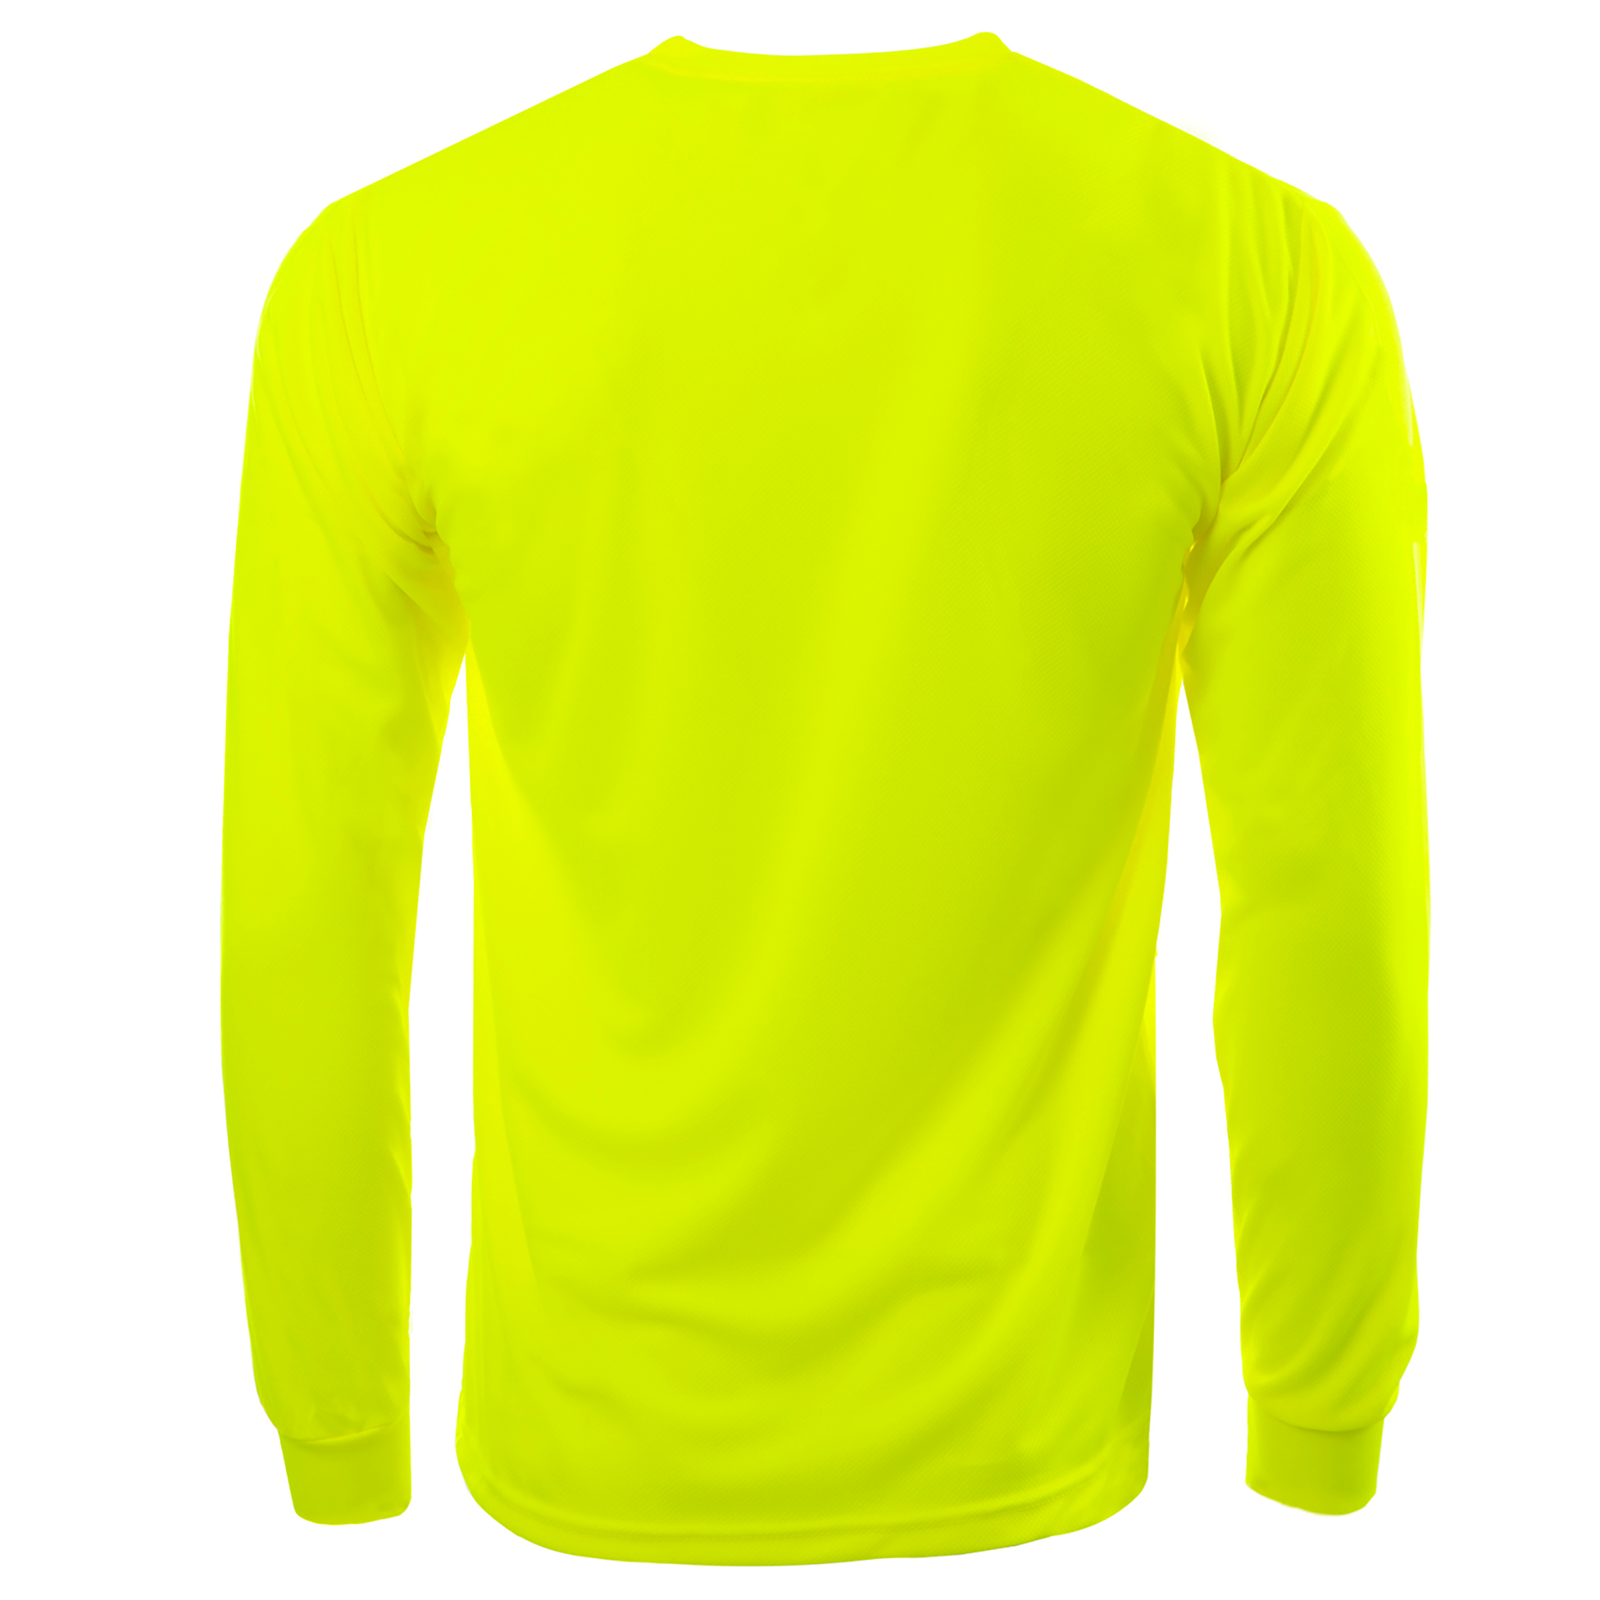 Long Sleeve High Visibility Safety Shirt | Breathable & Sweat Wicking ...